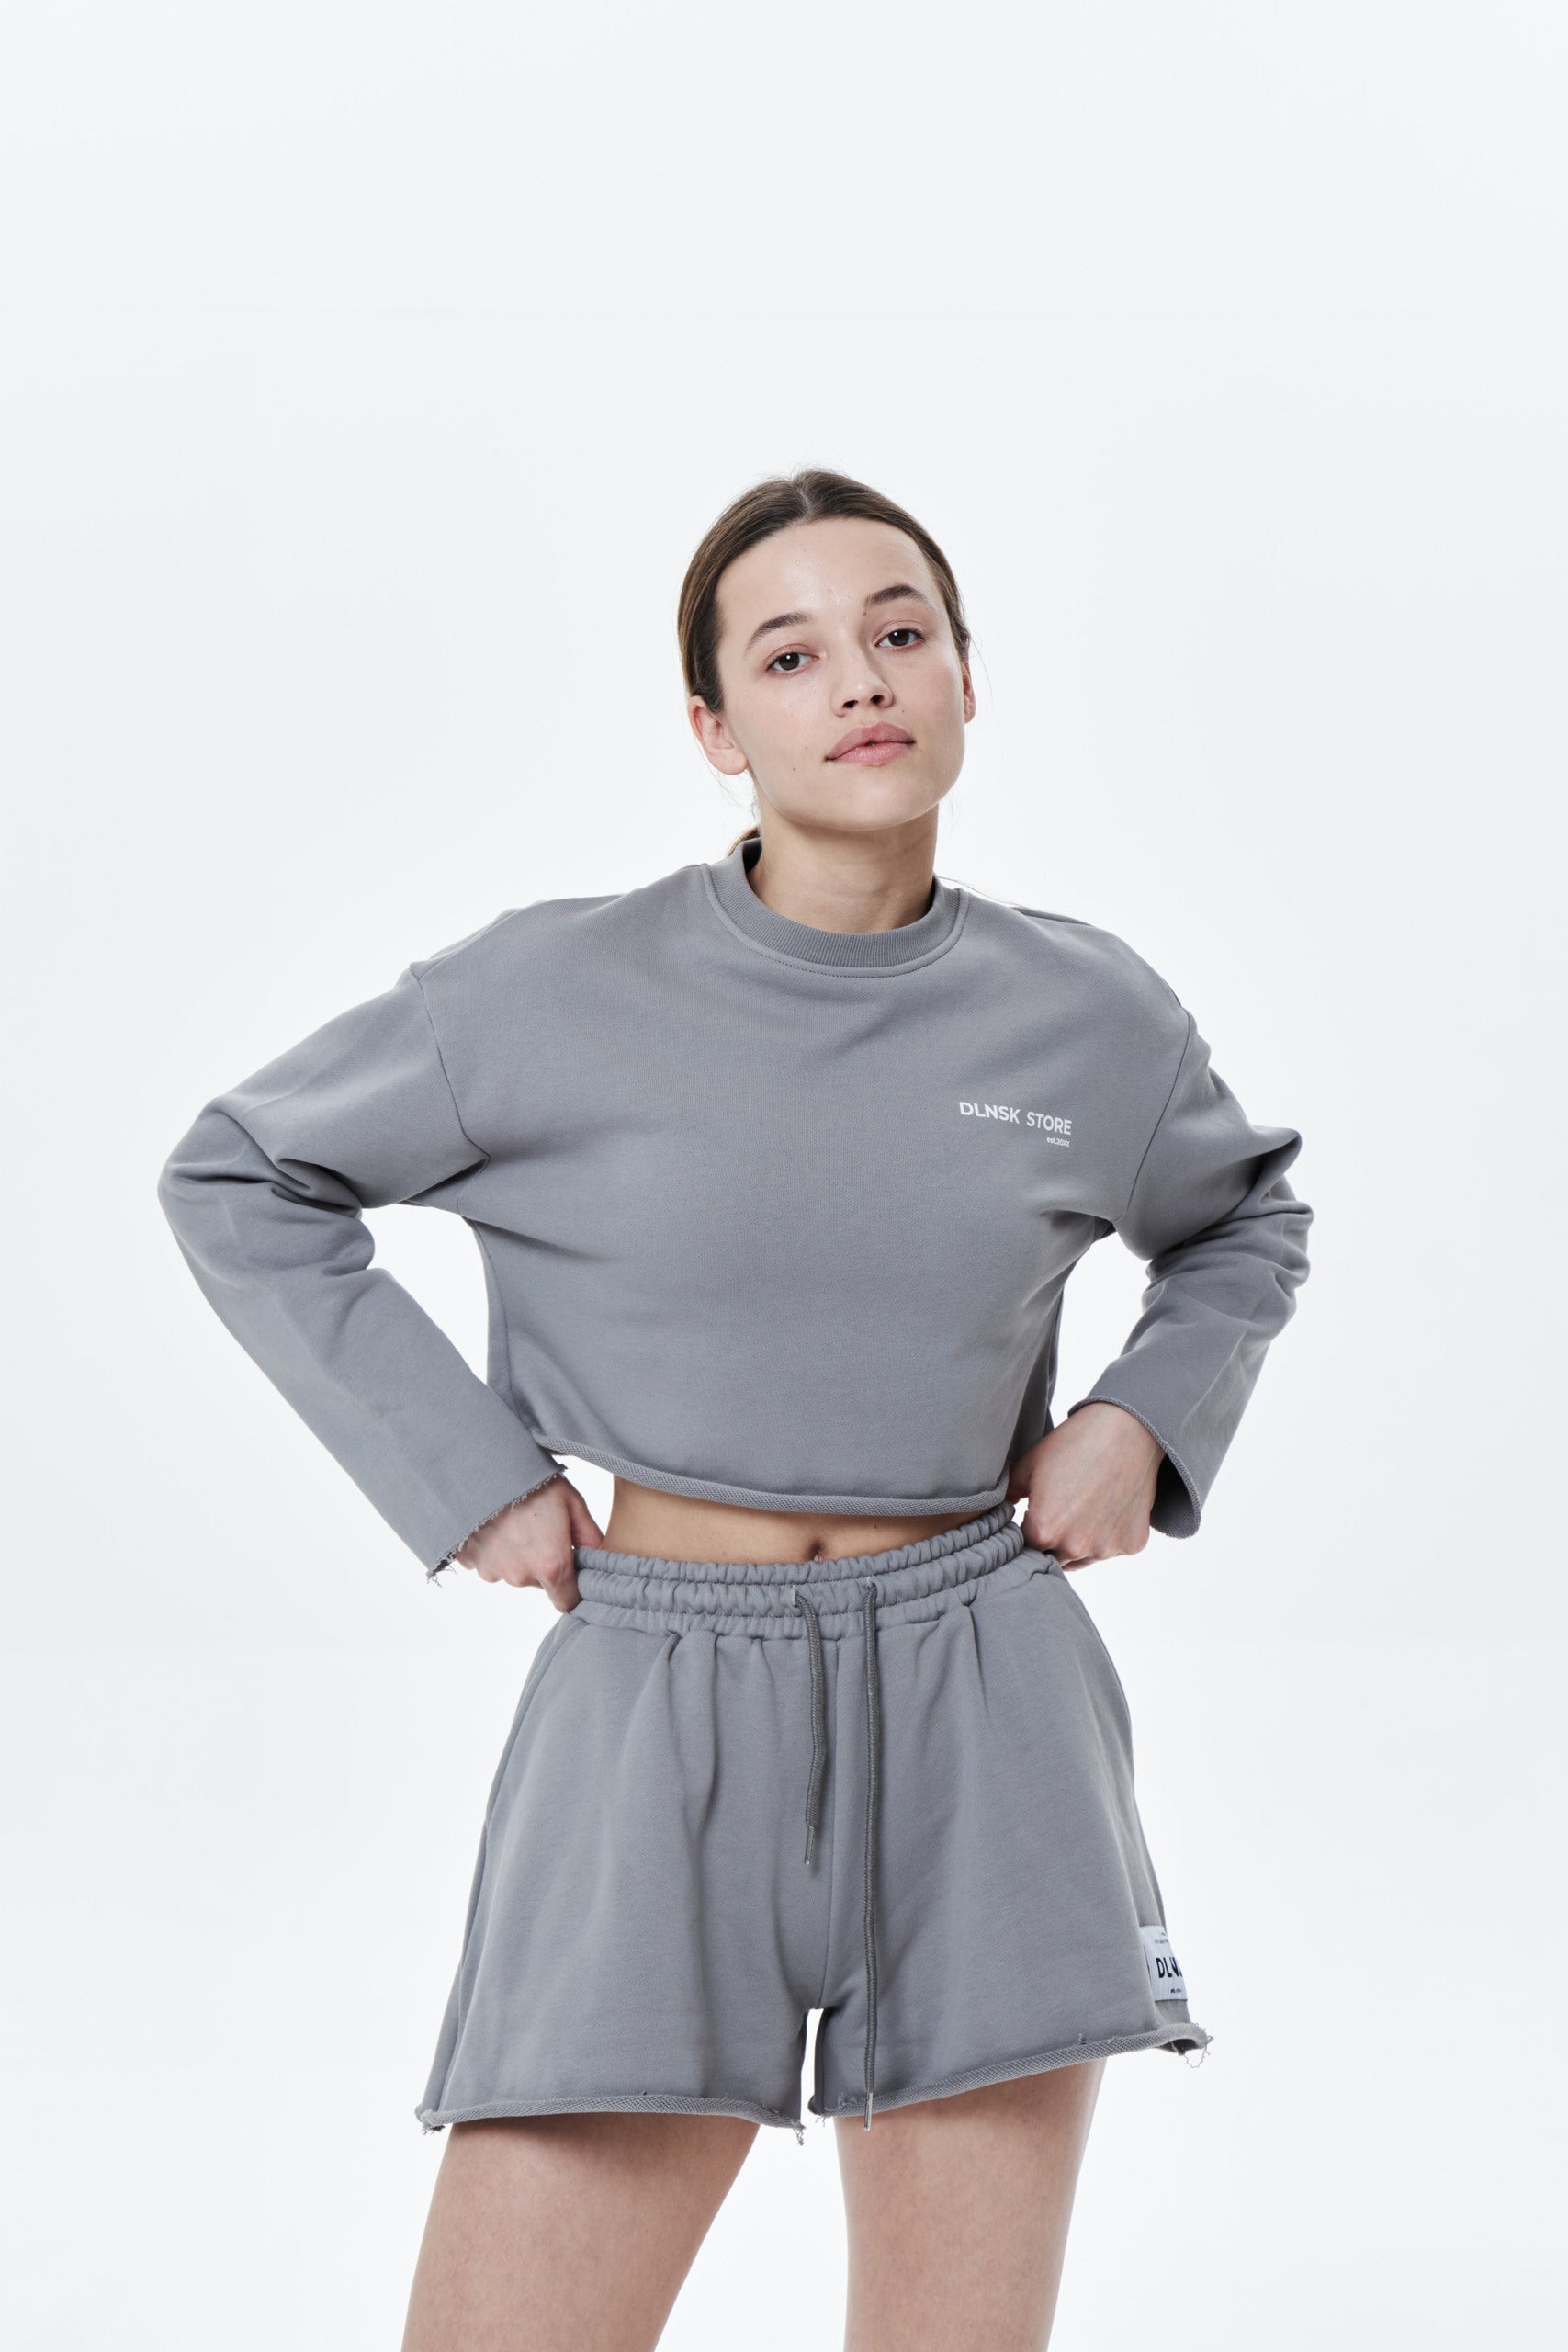 CROPPED CREWNECK in COOL GRAY Cropped hoodie set DLNSK 